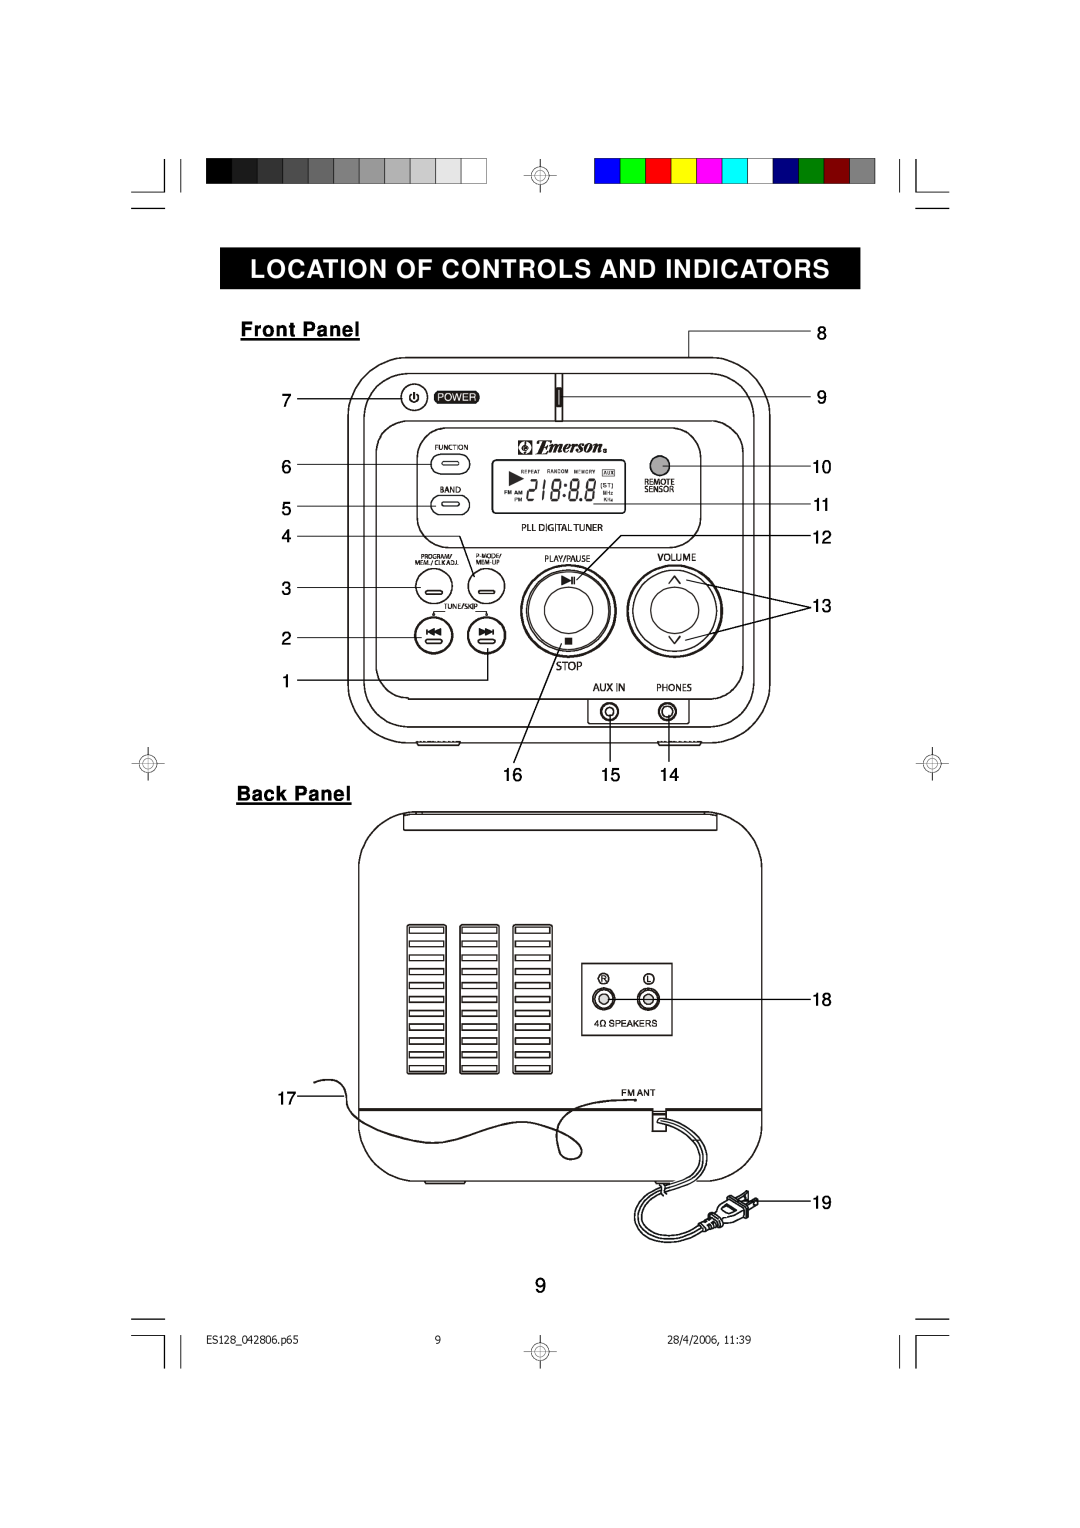 Emerson ES128 owner manual Location Of Controls And Indicators, Front Panel, Back Panel 